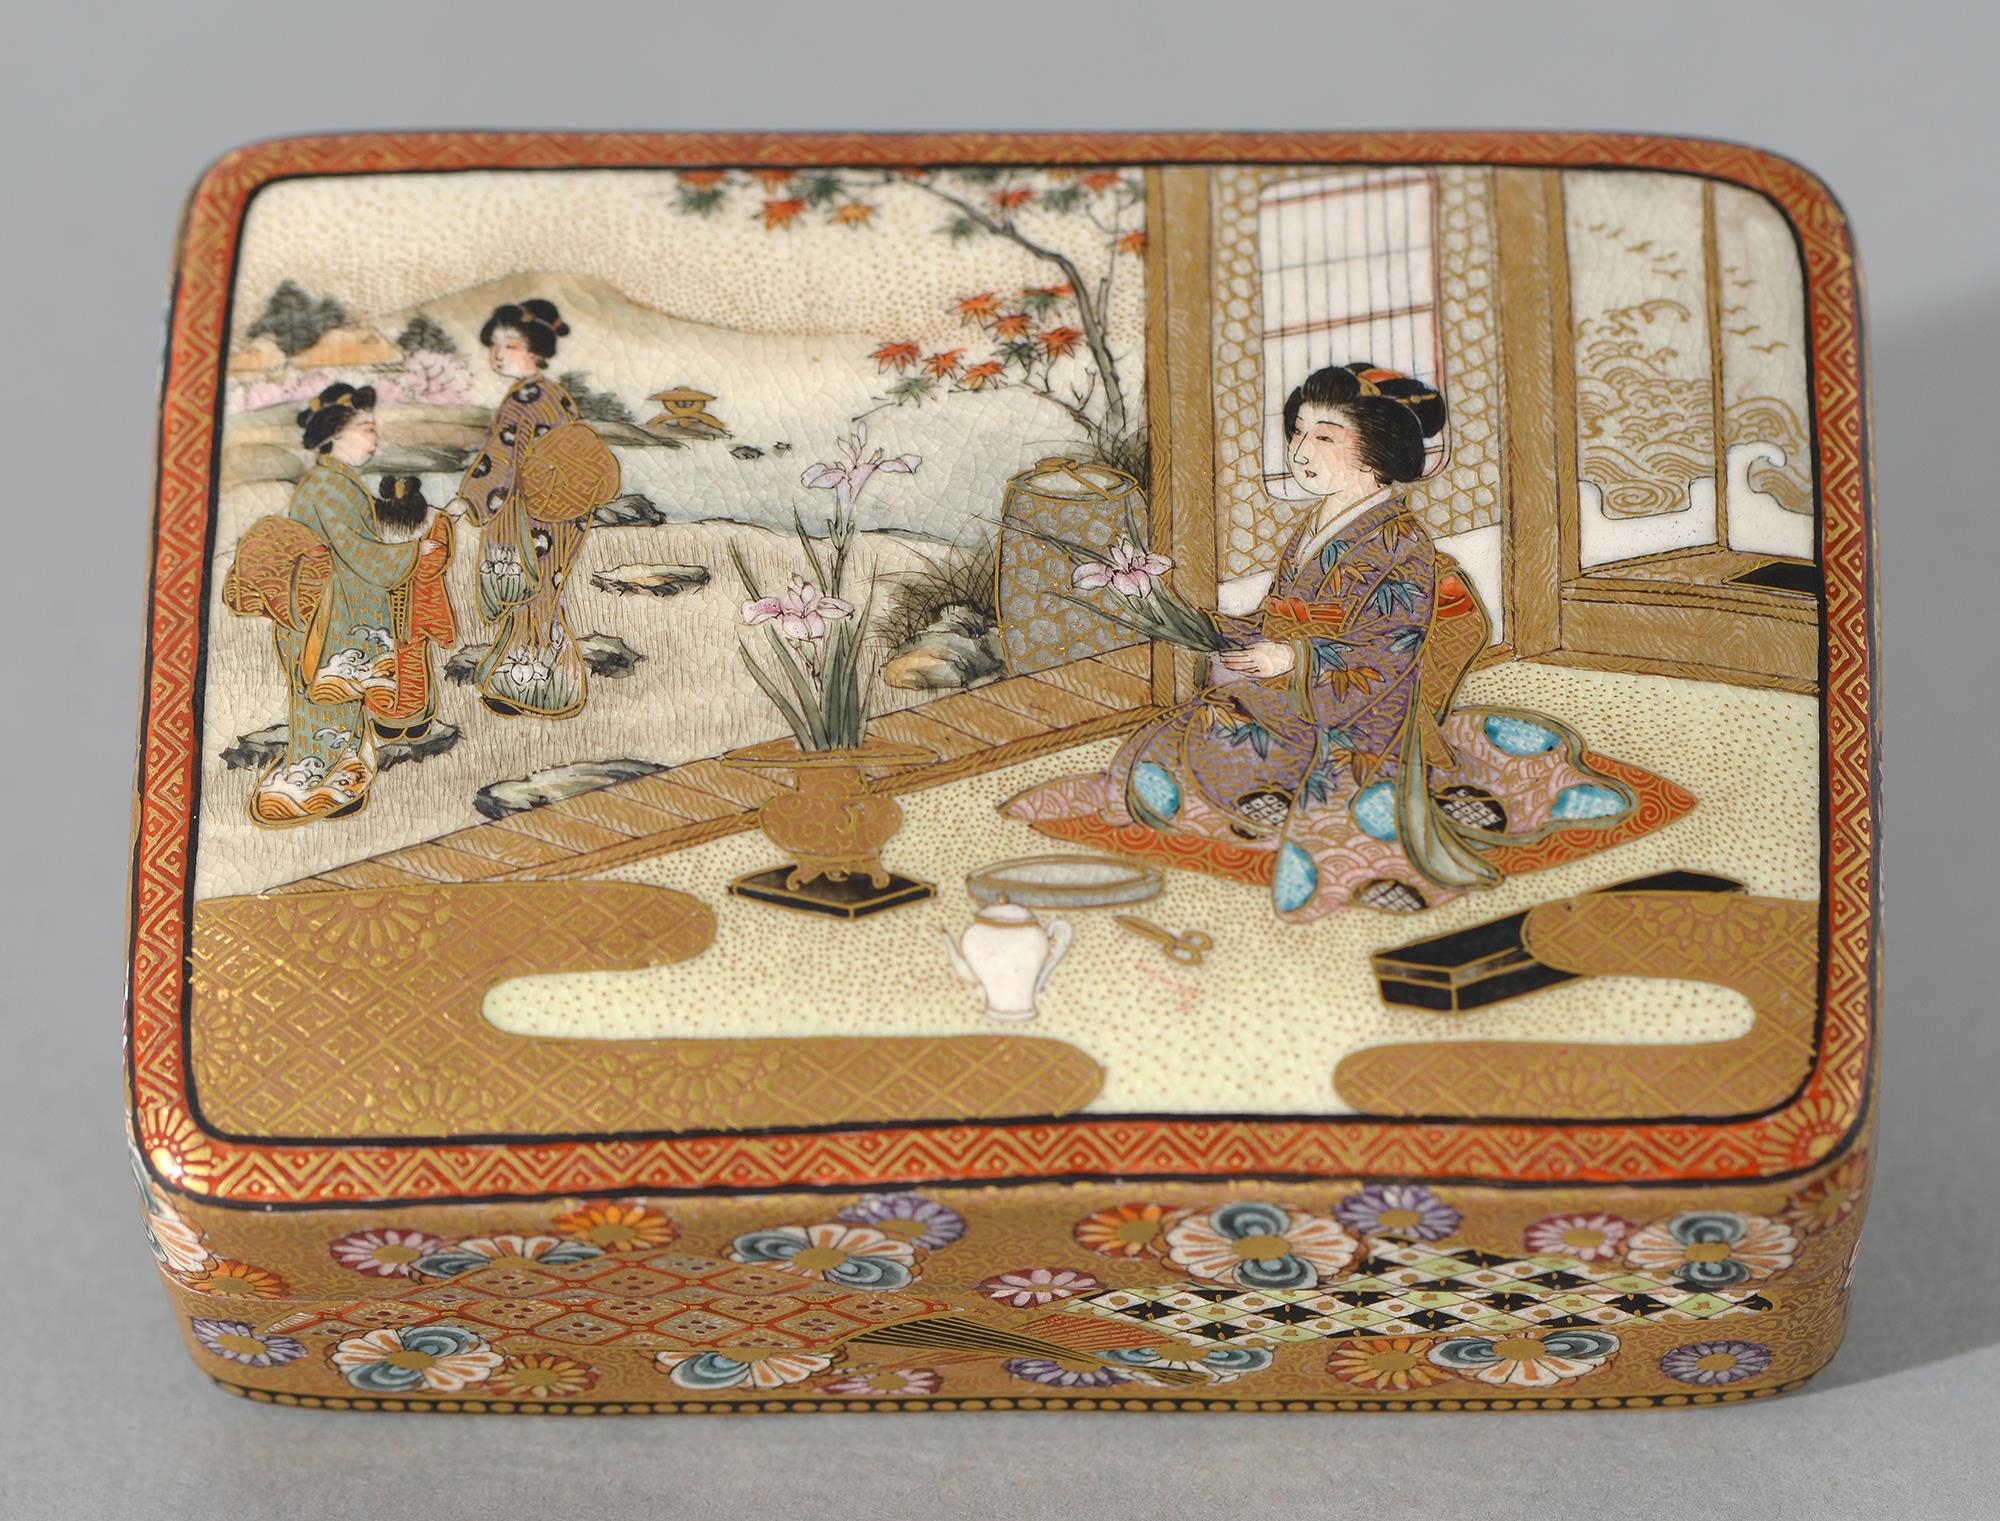 A Satsuma ware box and cover, Meiji period, the cover enamelled with a woman in an interior